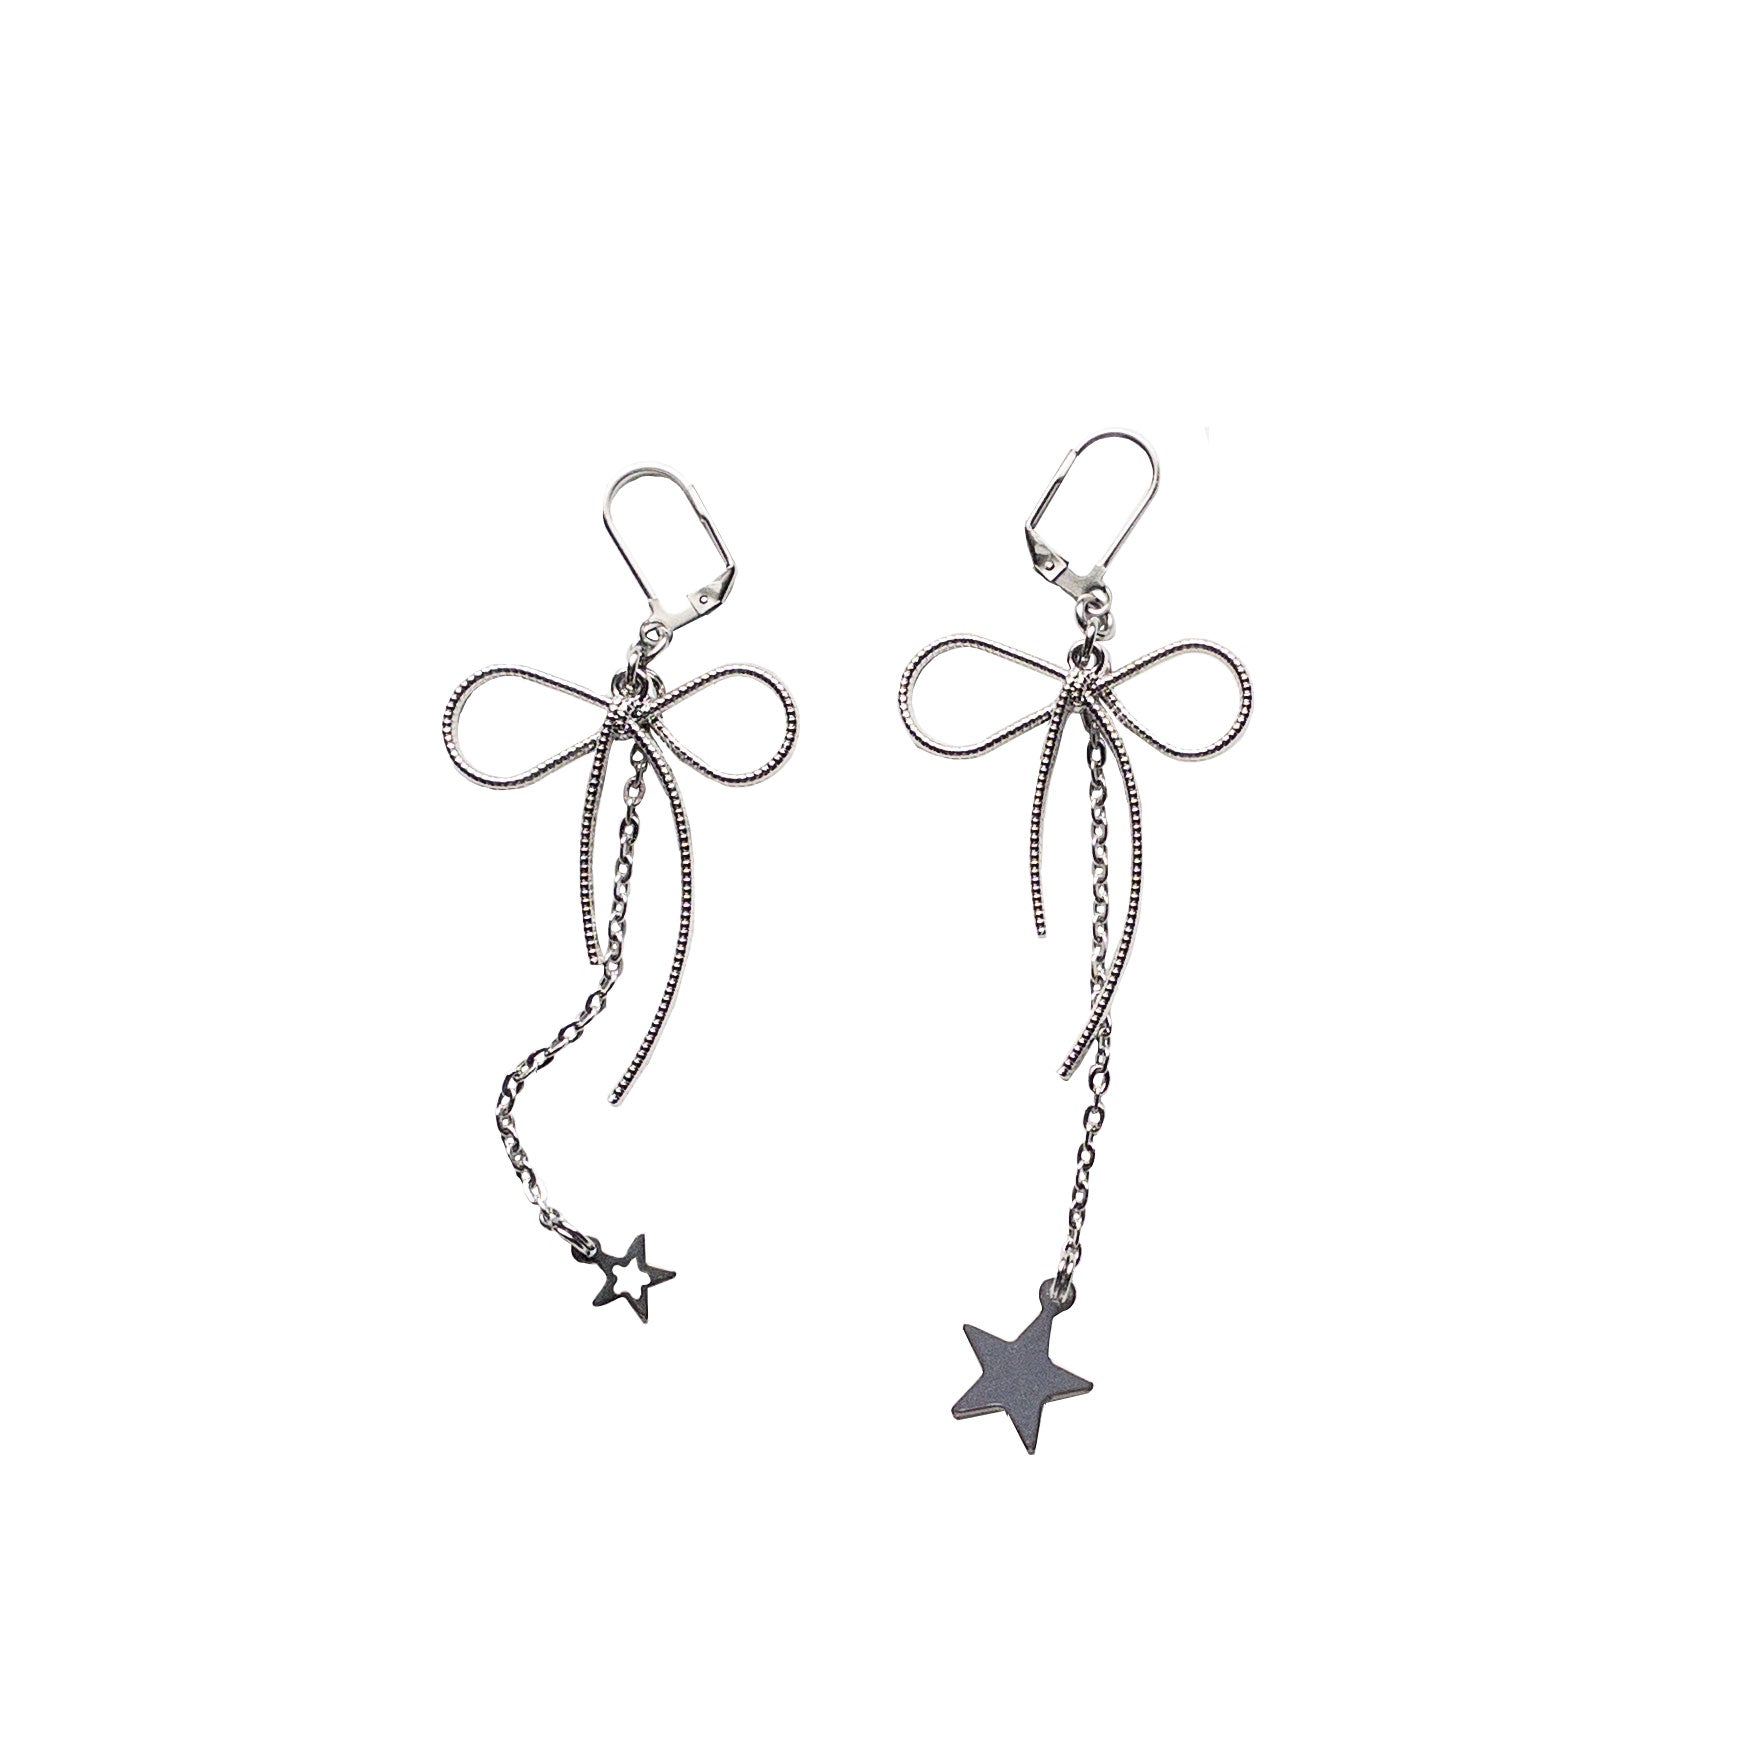 silver bow earrings with hypoallergenic stainless steel hooks